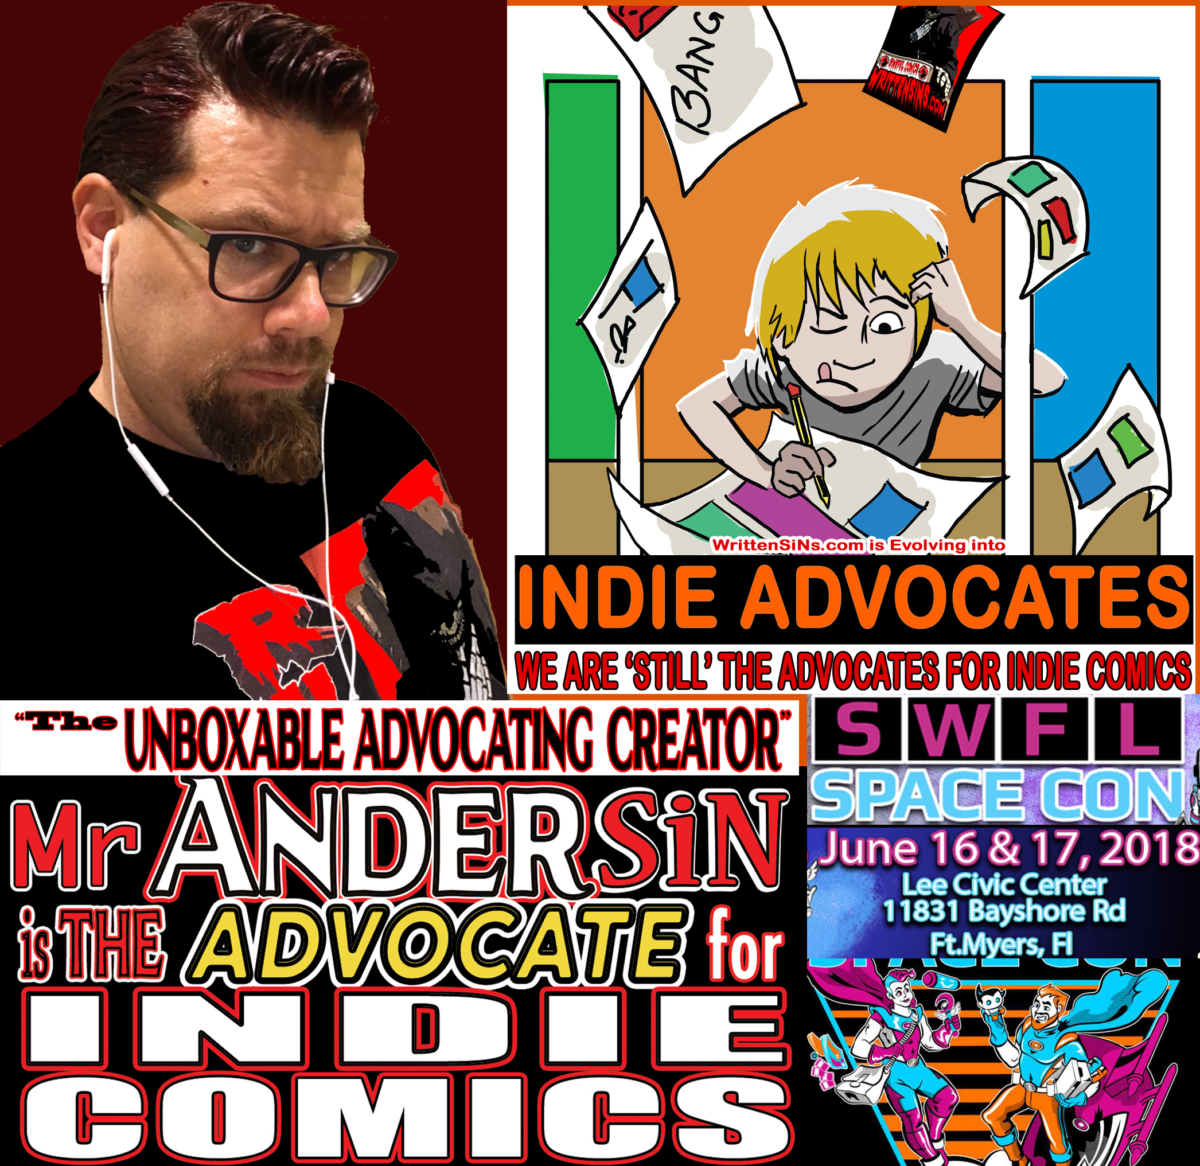 Mr. Andersin was LIVE from Fort Myers @ SWFL SPACE COMIC CON Set up